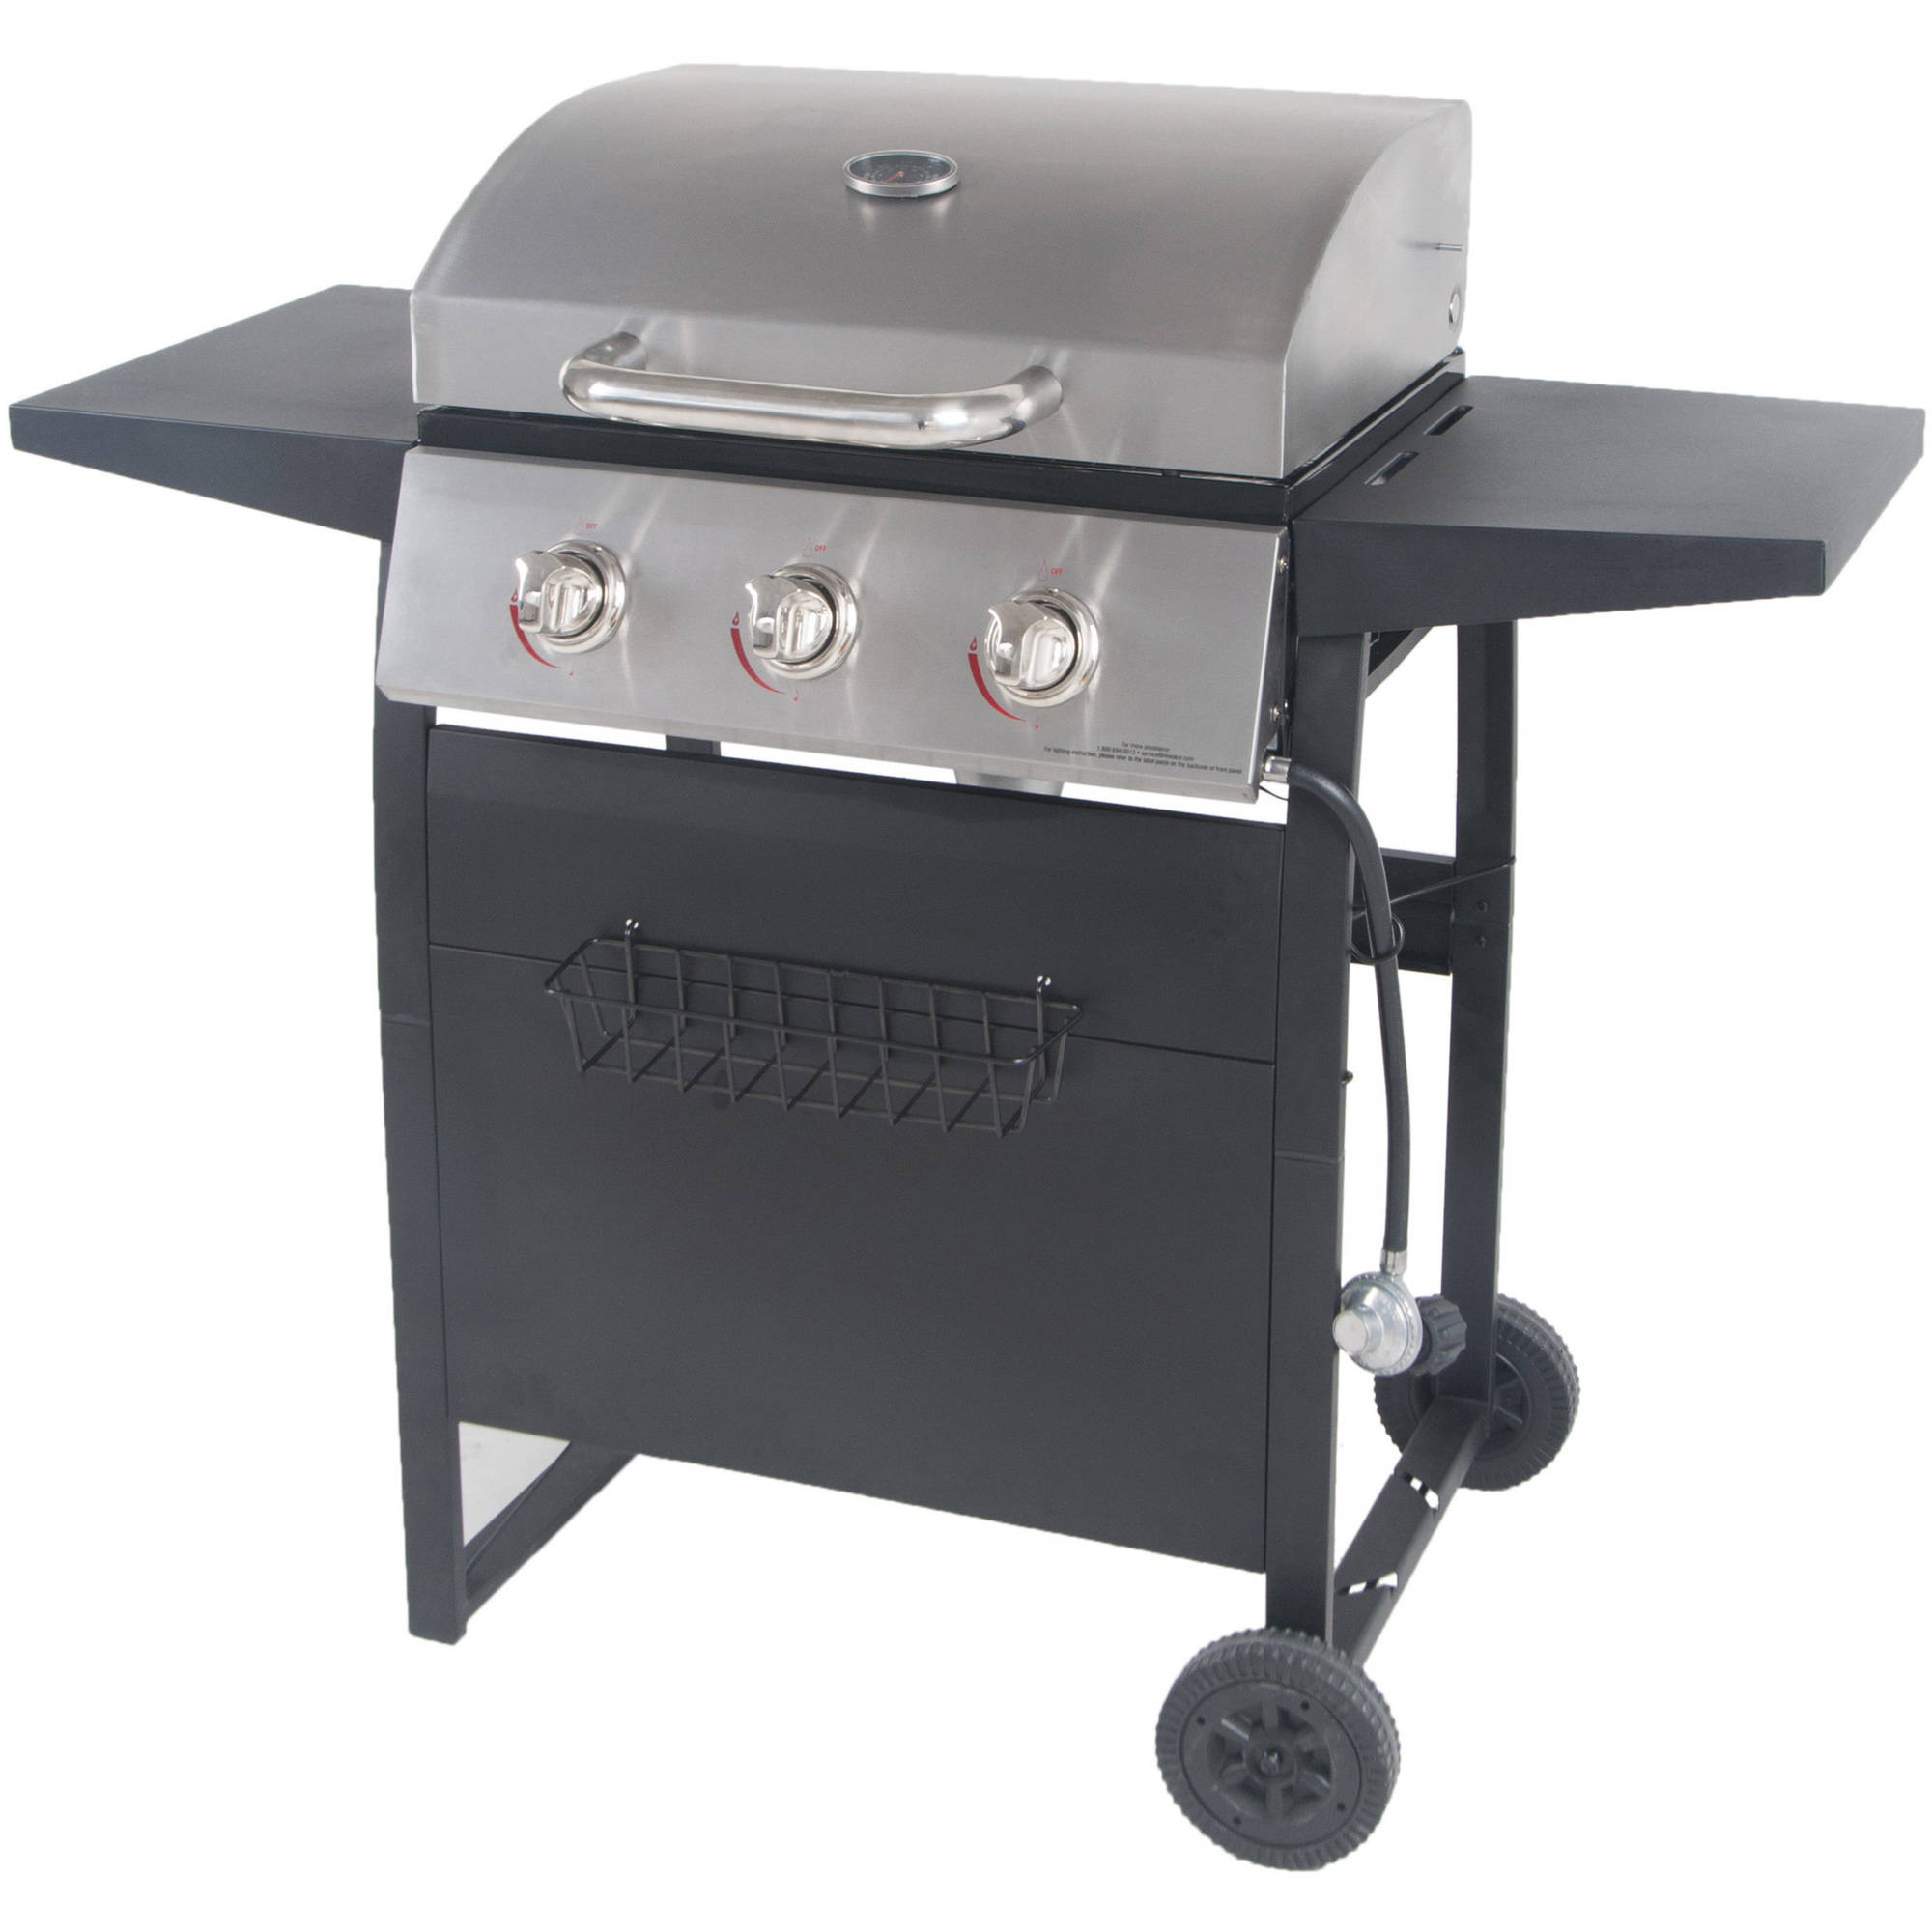 RevoAce 3-Burner Space Saver Propane Gas Grill, Stainless and Black, GBC1706W - image 4 of 11